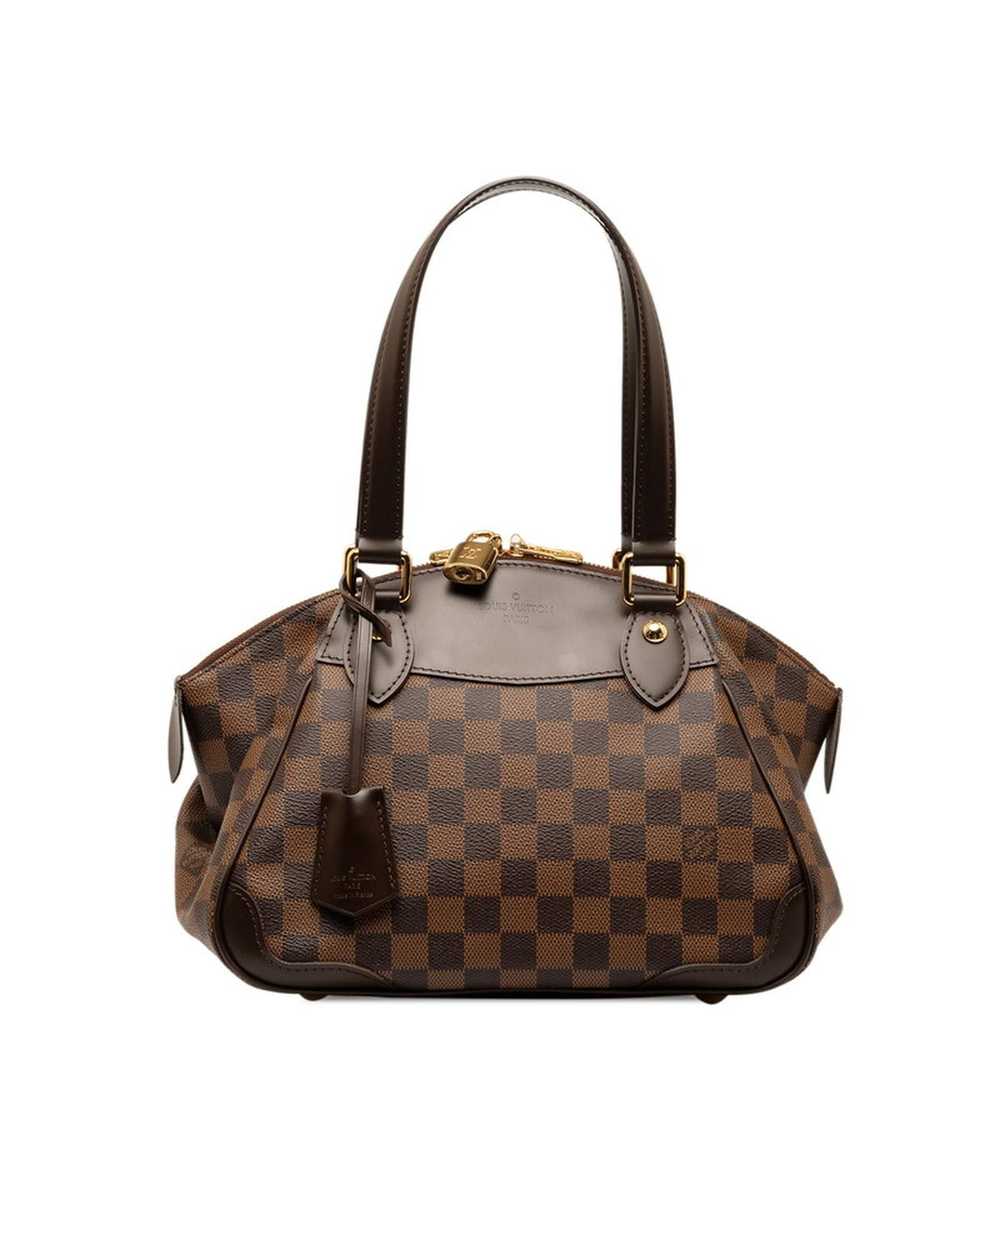 Louis Vuitton Brown Leather Verona PM Bag in Exce… - image 1